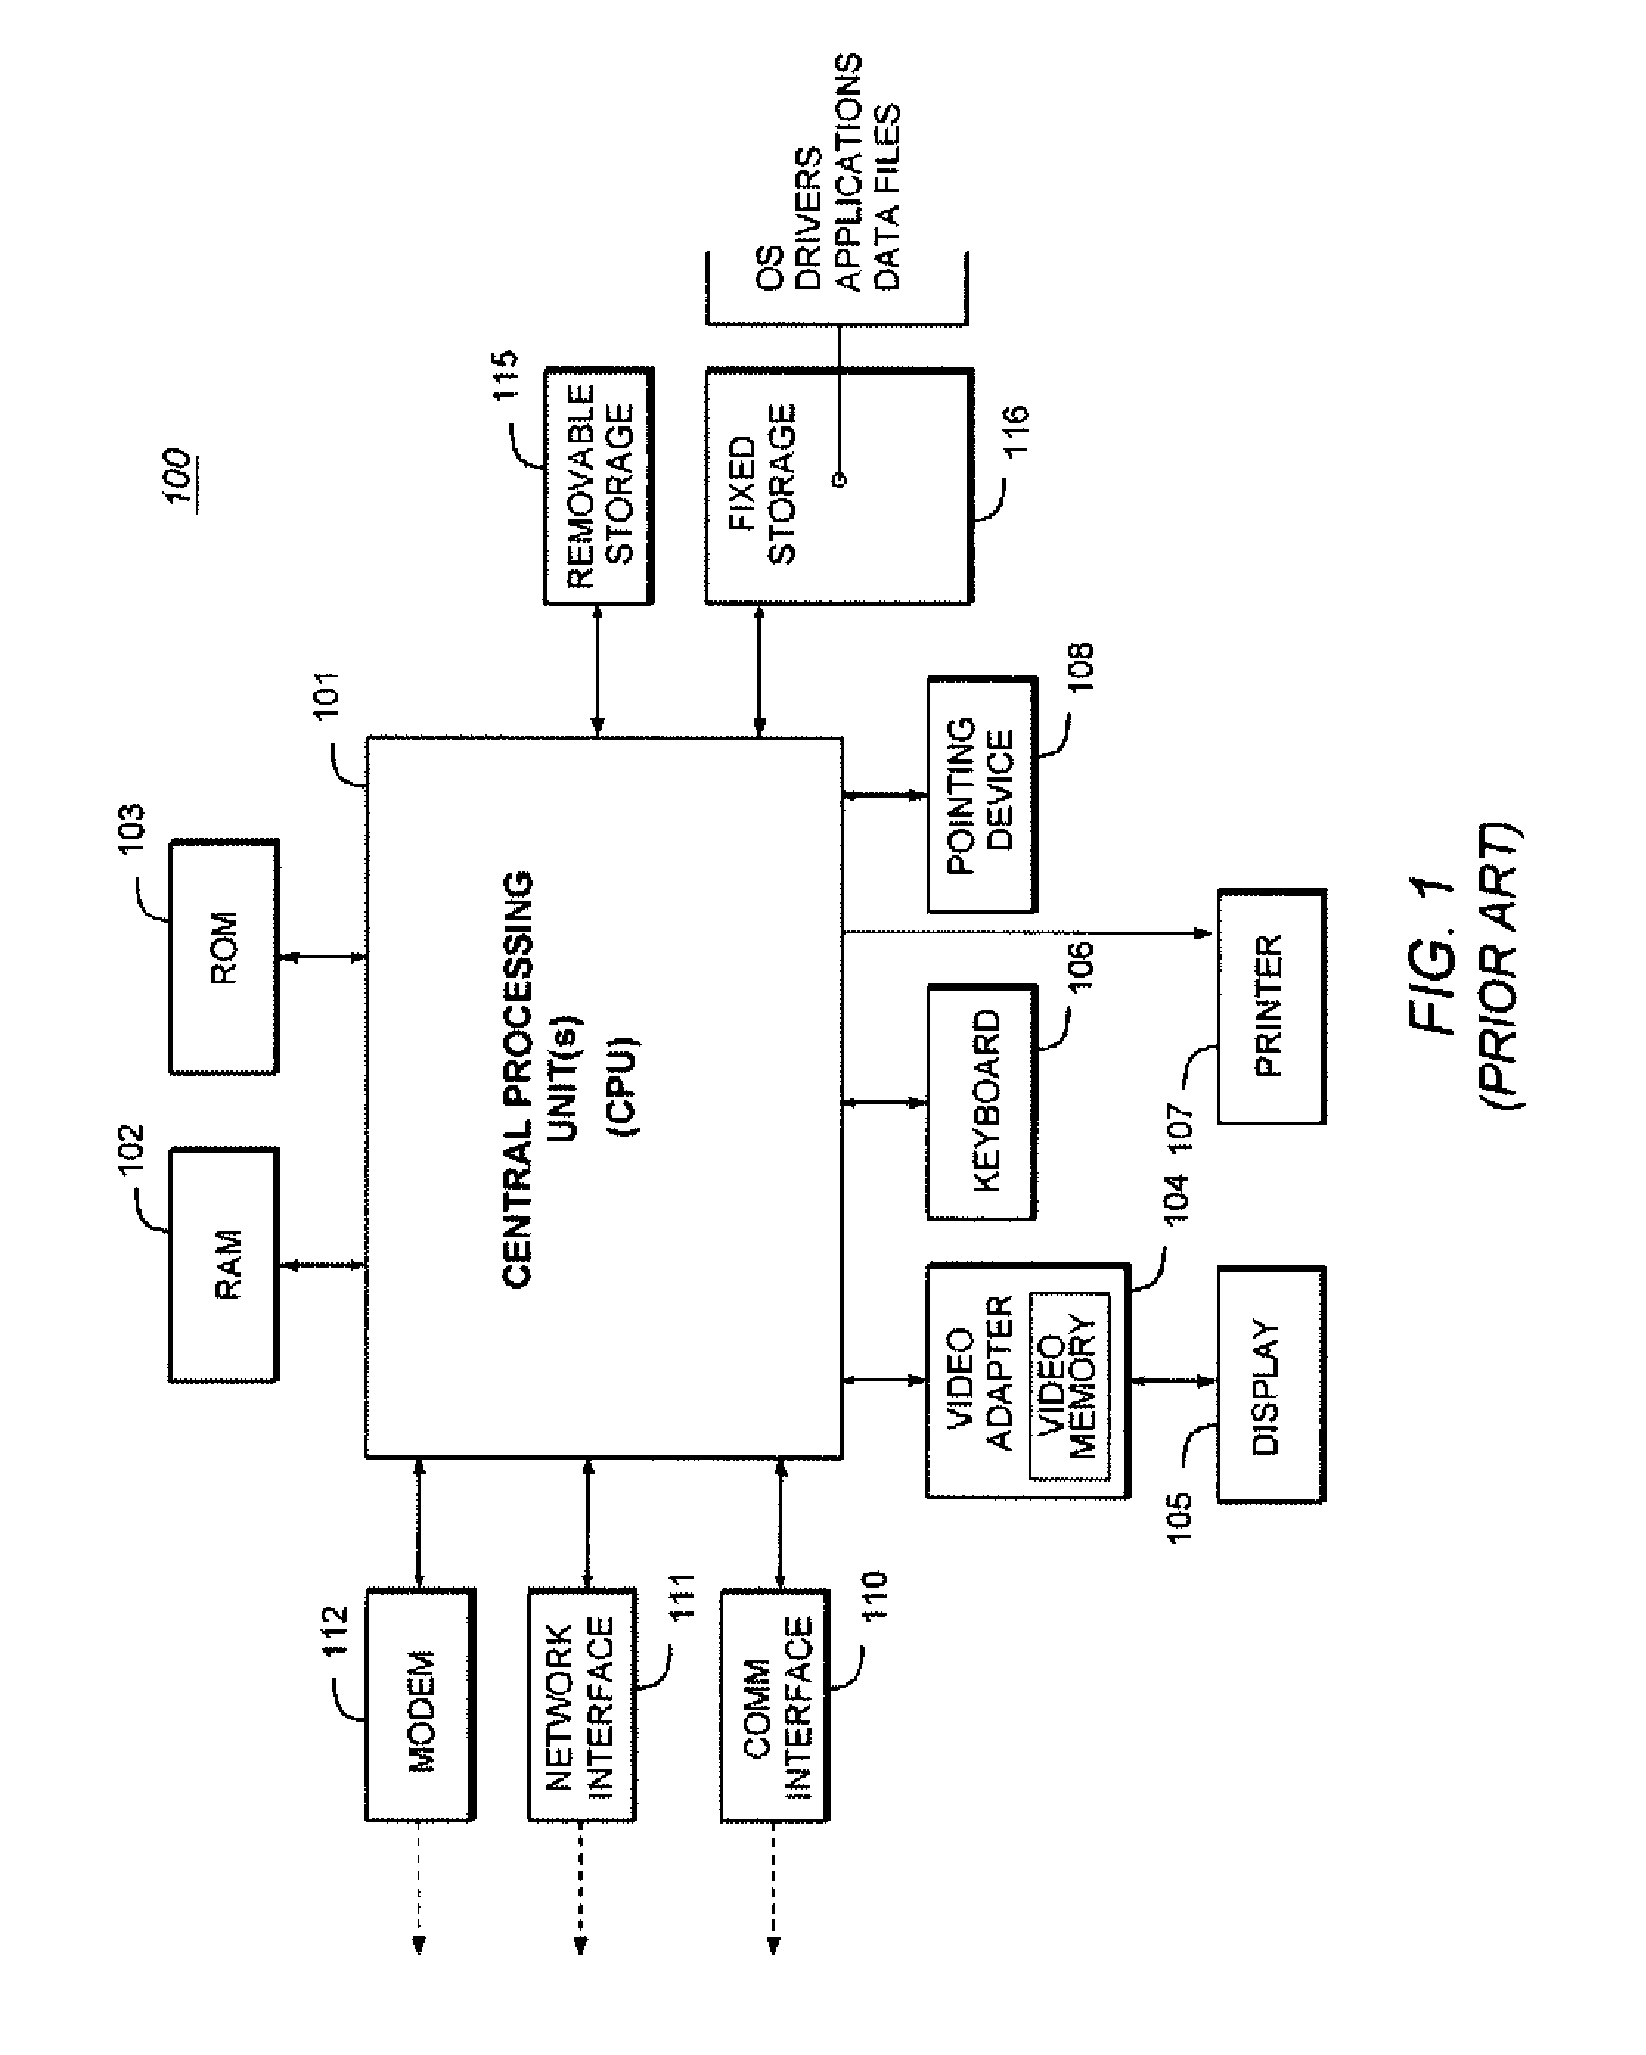 Managing Data Storage as an In-Memory Database in a Database Management System